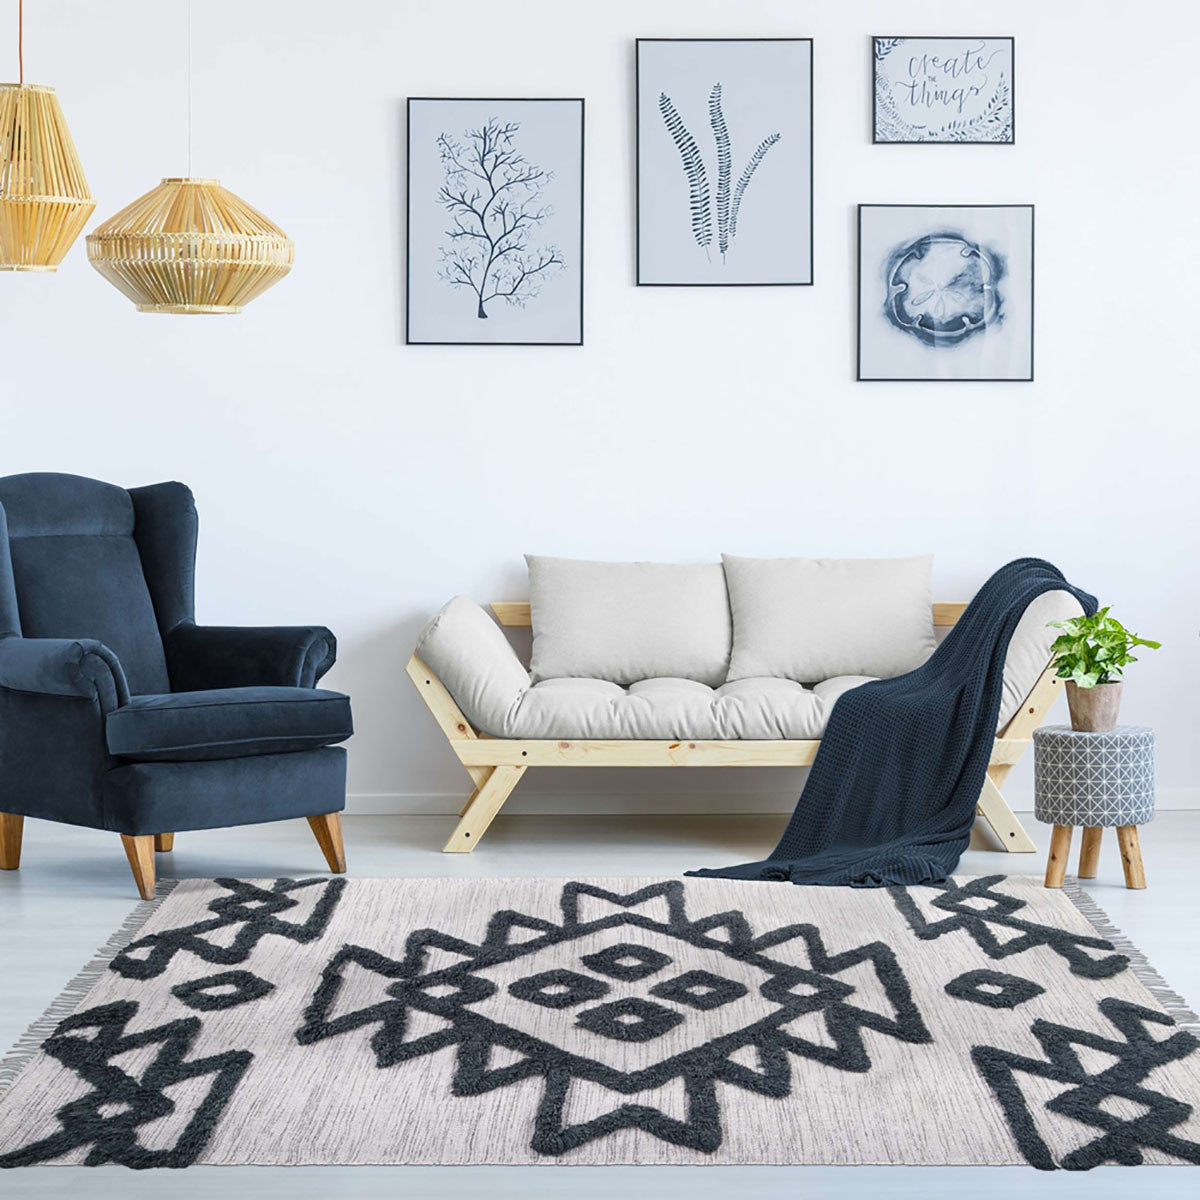 4' X 6' Ivory And Charcoal Wool Geometric Flatweave Handmade Stain Resistant Area Rug With Fringe